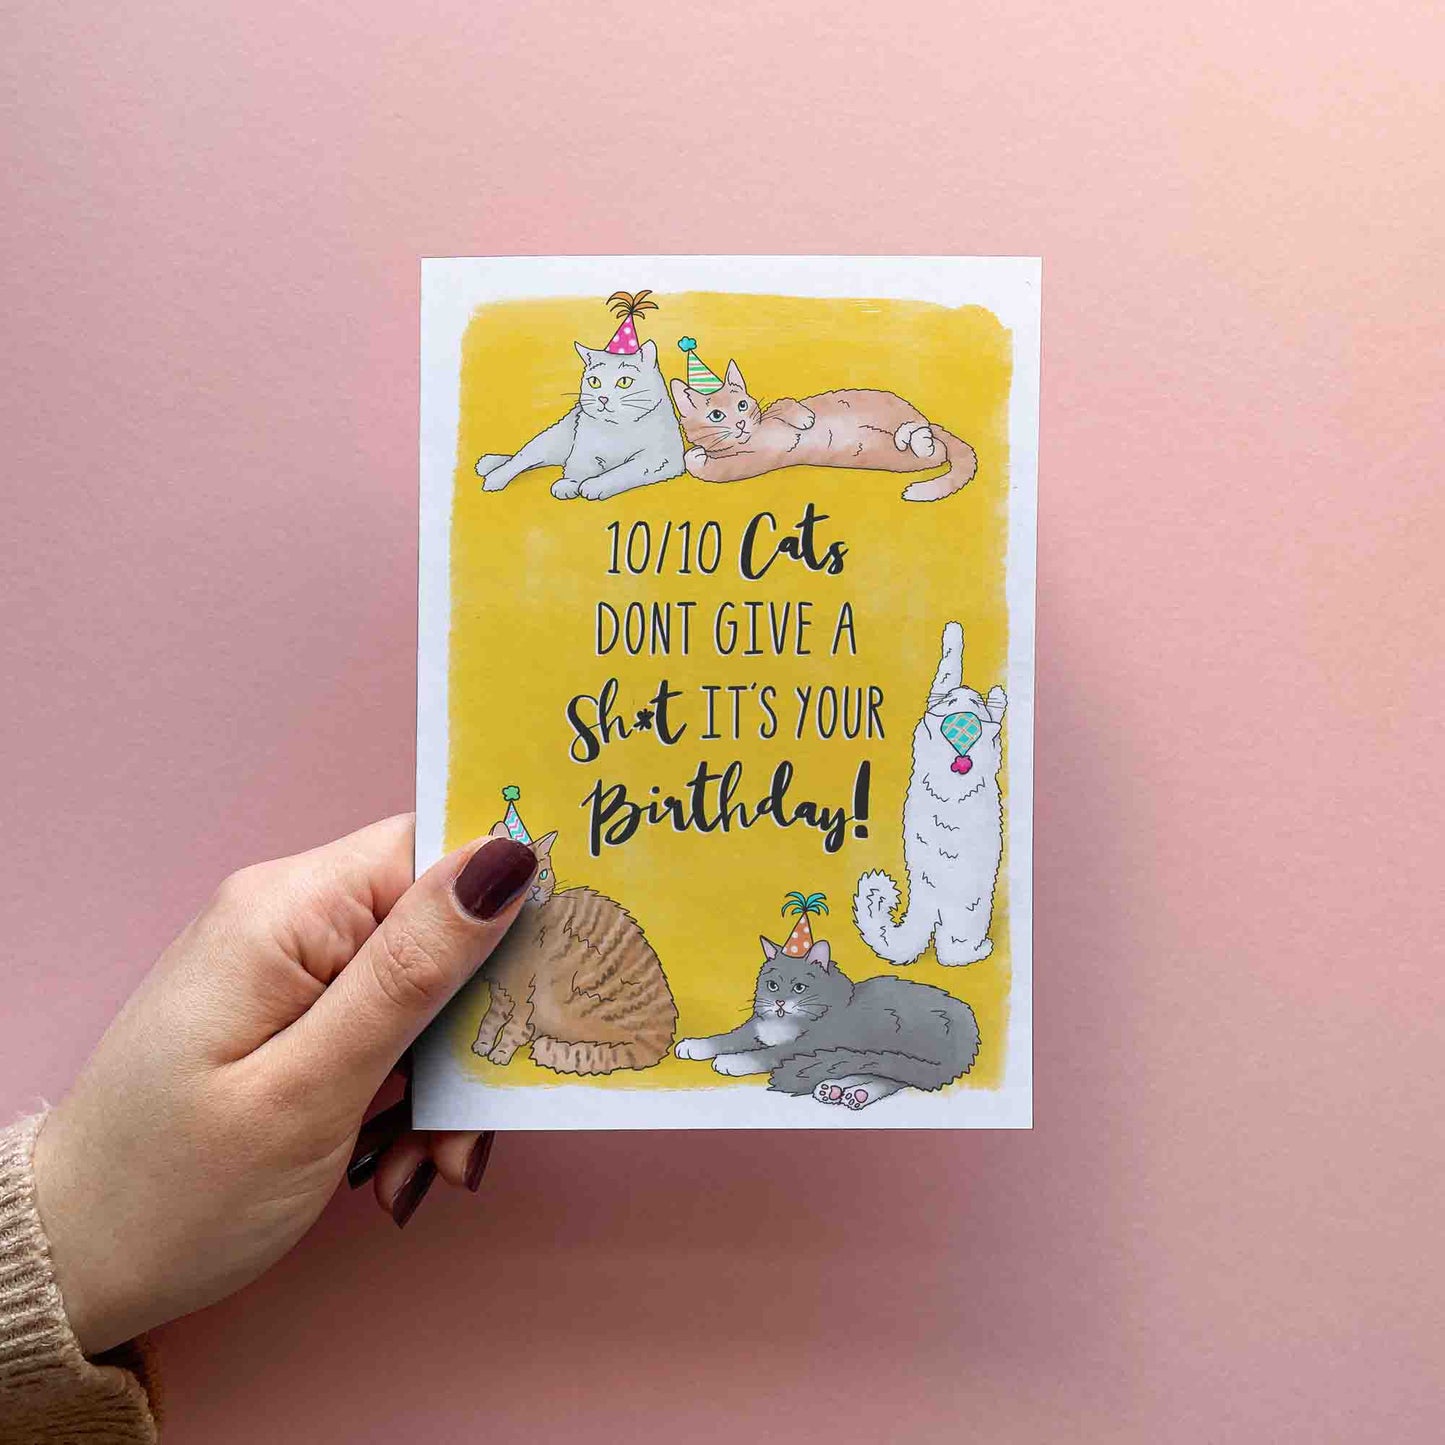 funny birthday card for cat mom, cat dad or cat lovers in general.Reading 10/10 cats don't give a sh*t it's your birthday! 